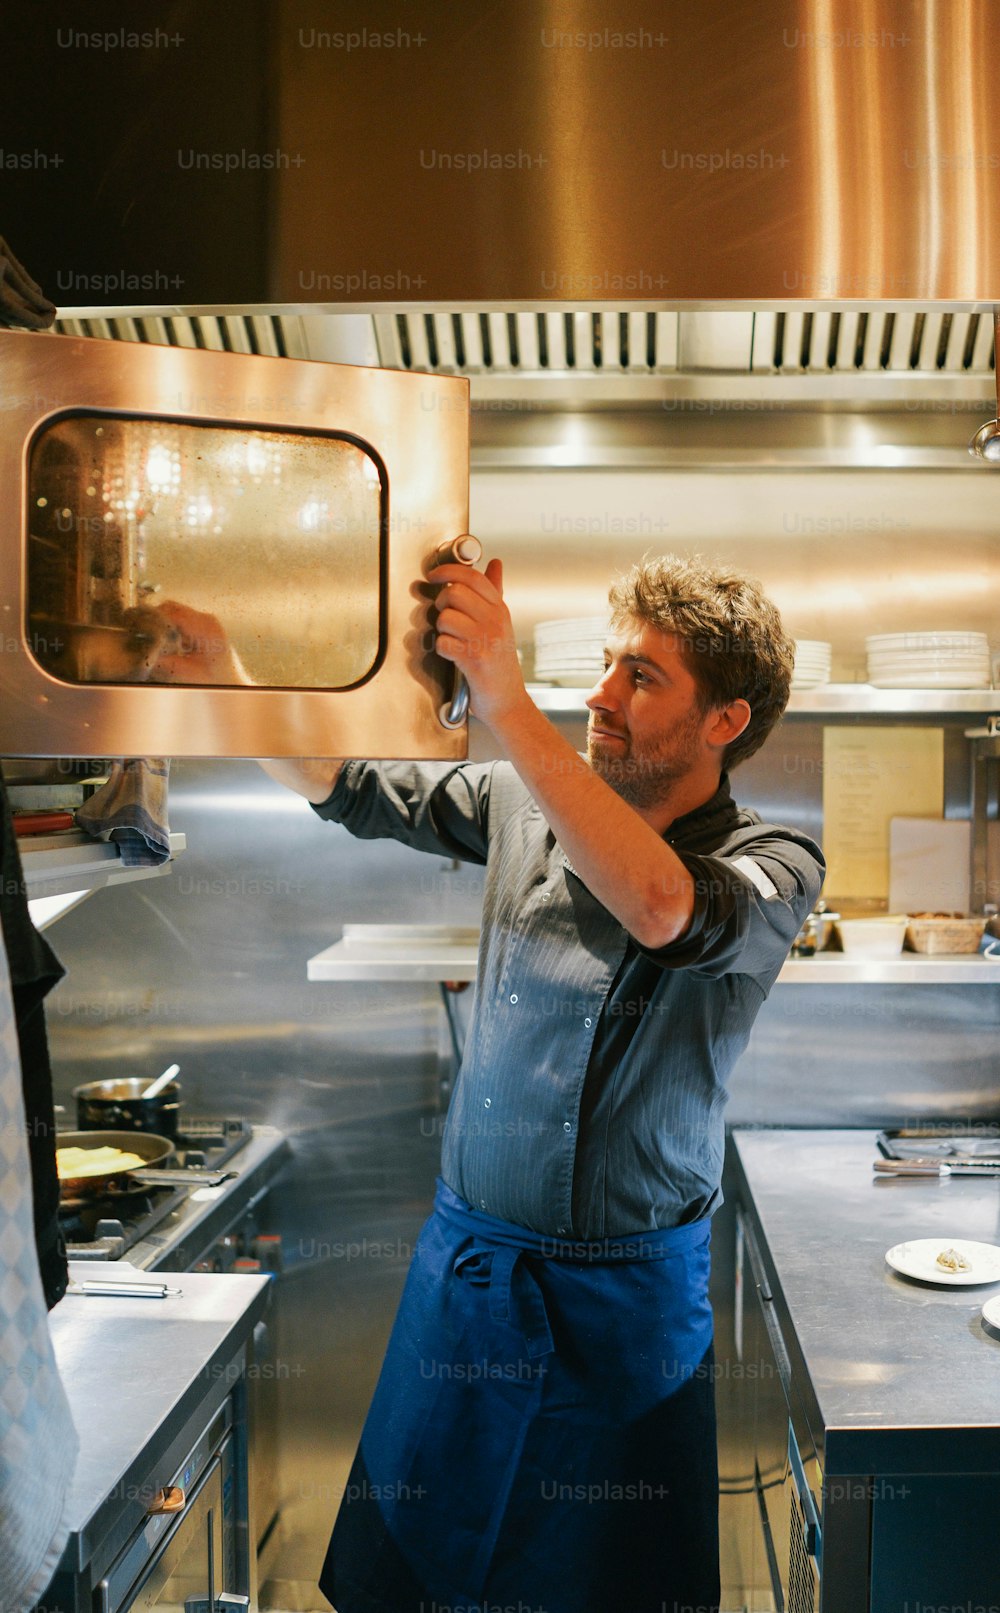 a man holding a microwave in a kitchen